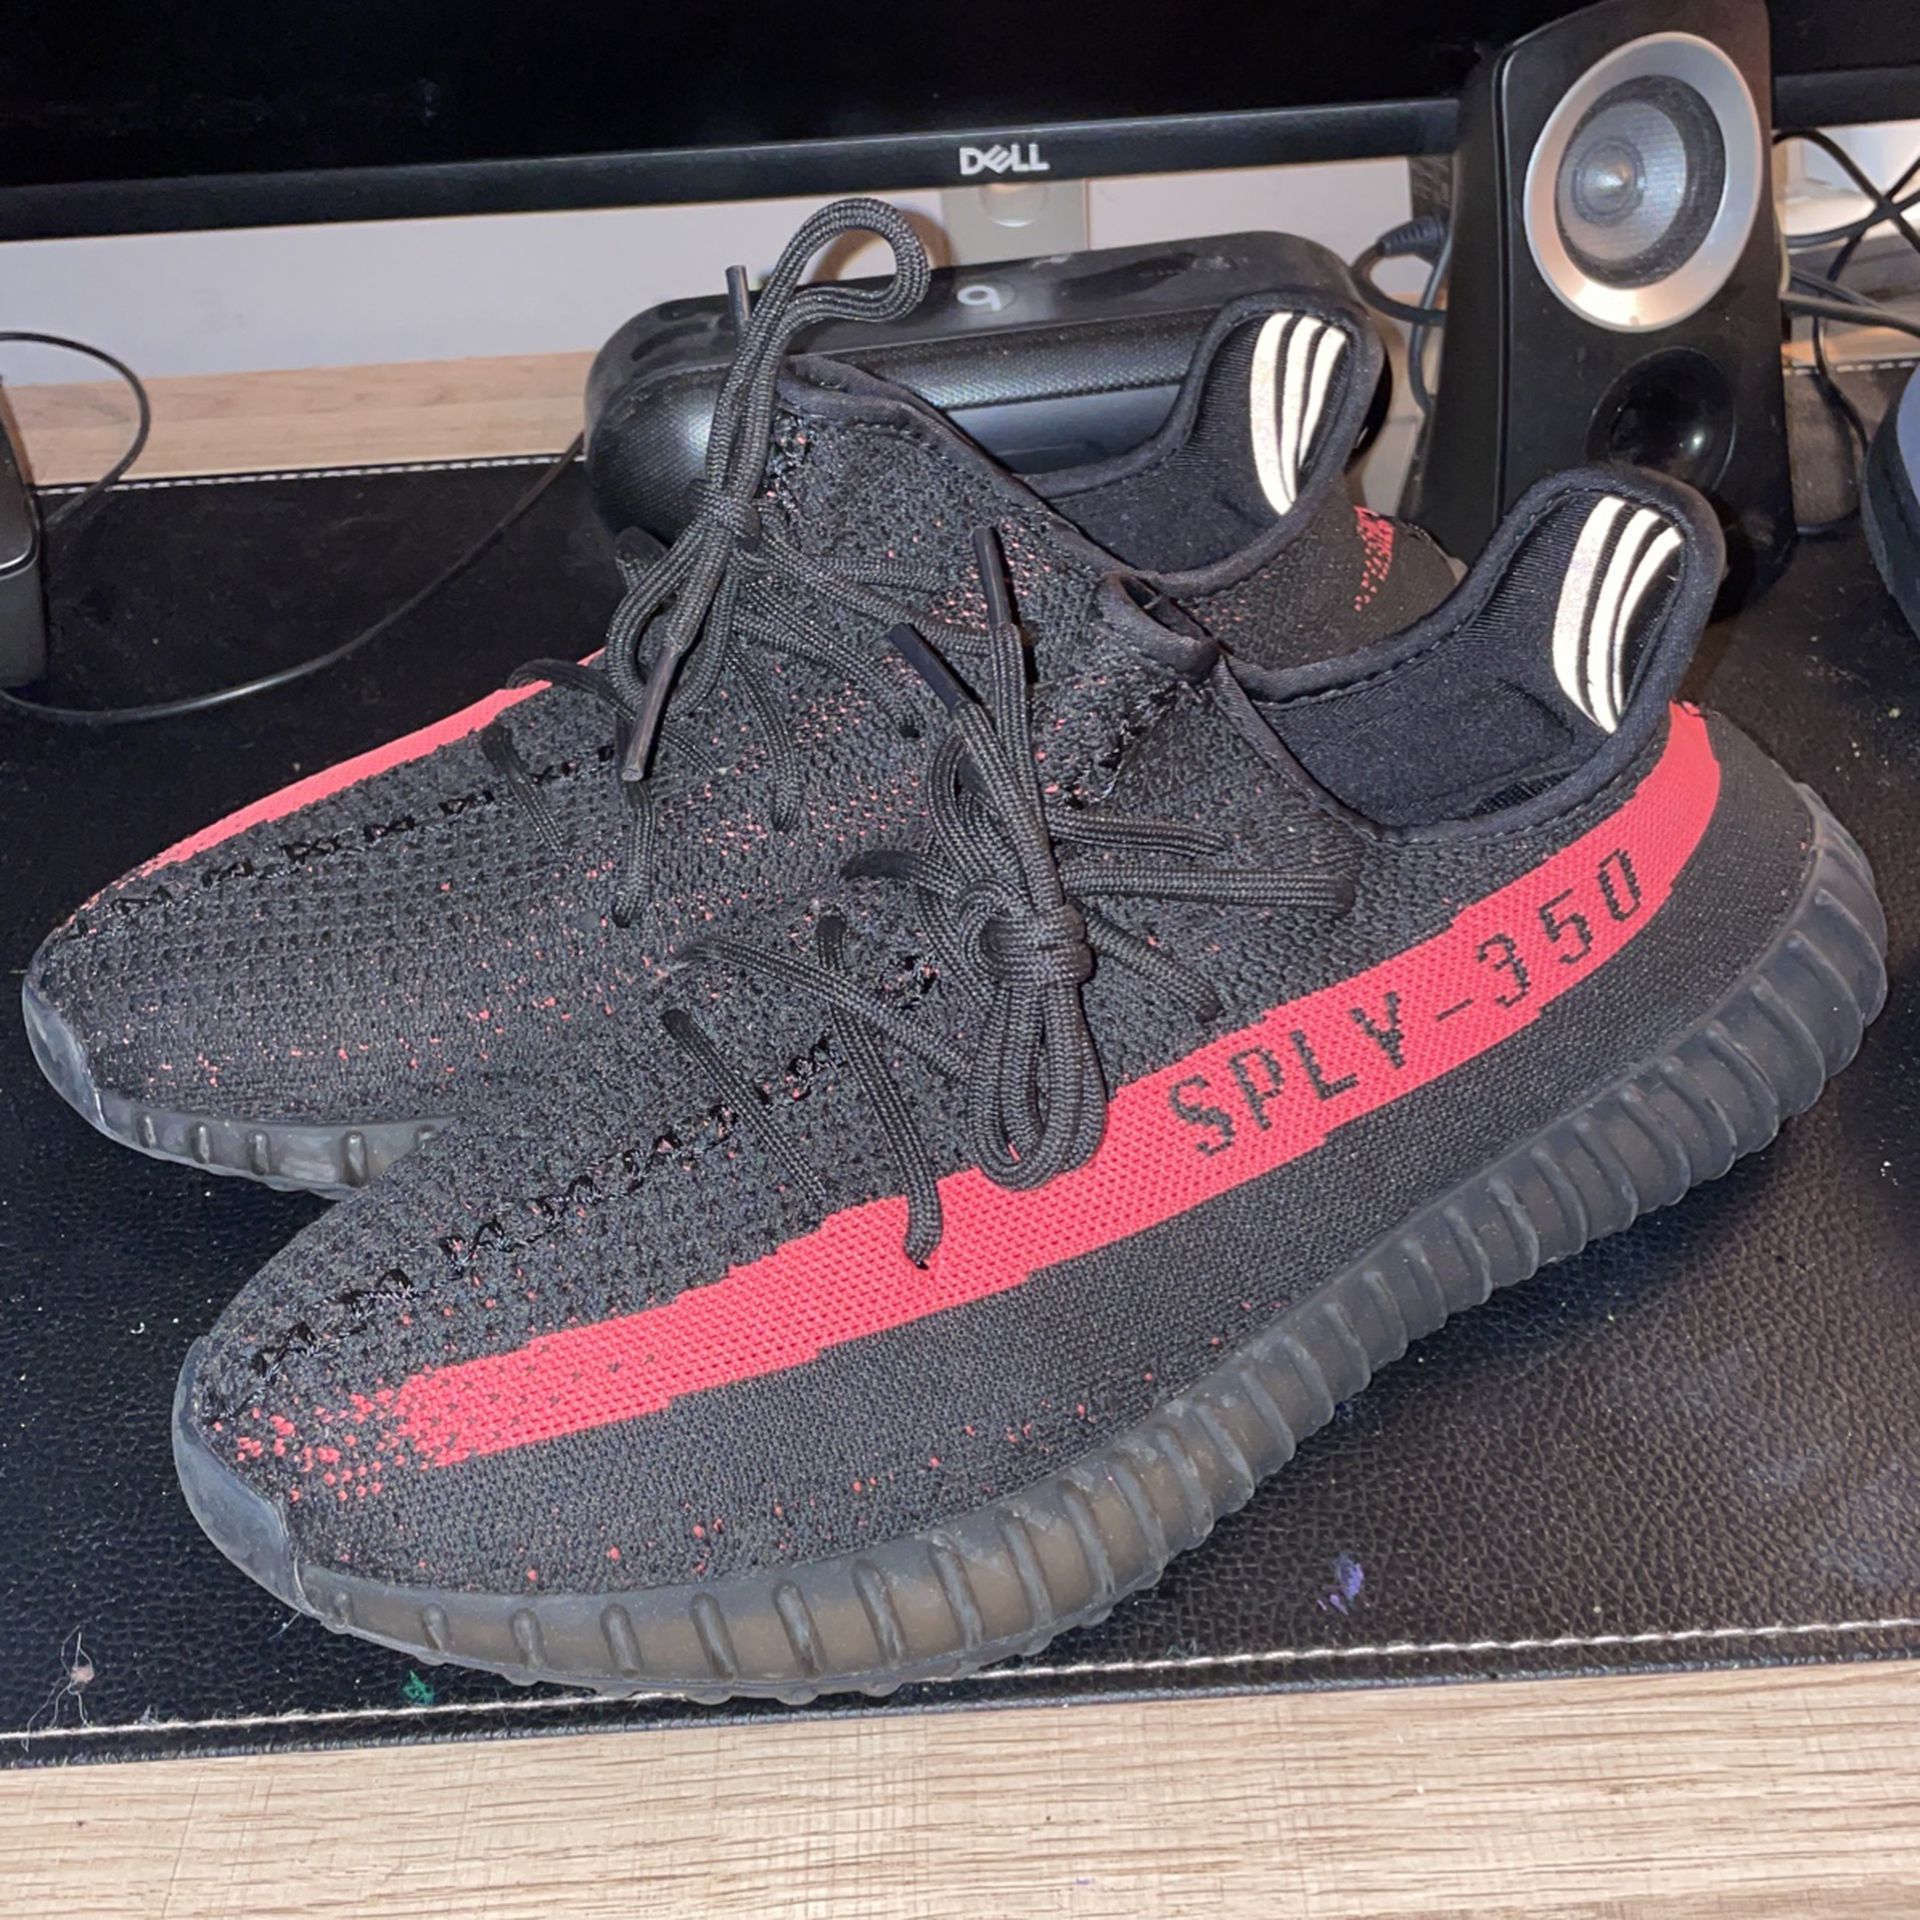 Adidas Yeezy Boost 350 V2 “Core Black Red” Size 11 for in Miami, FL - OfferUp